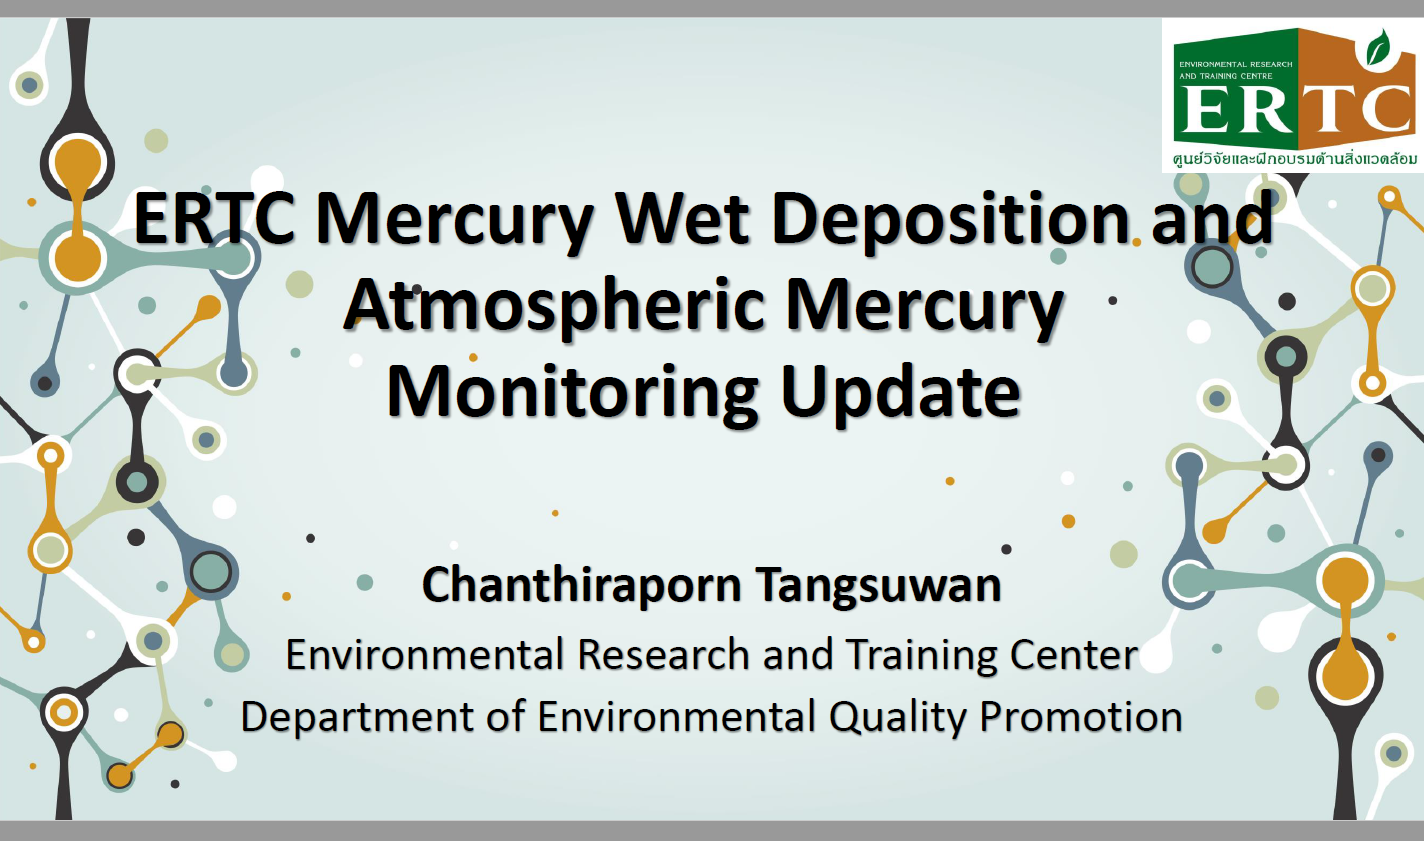 First page of ERTC Mercury Wet Deposition and Atmospheric Mercury Monitoring Update